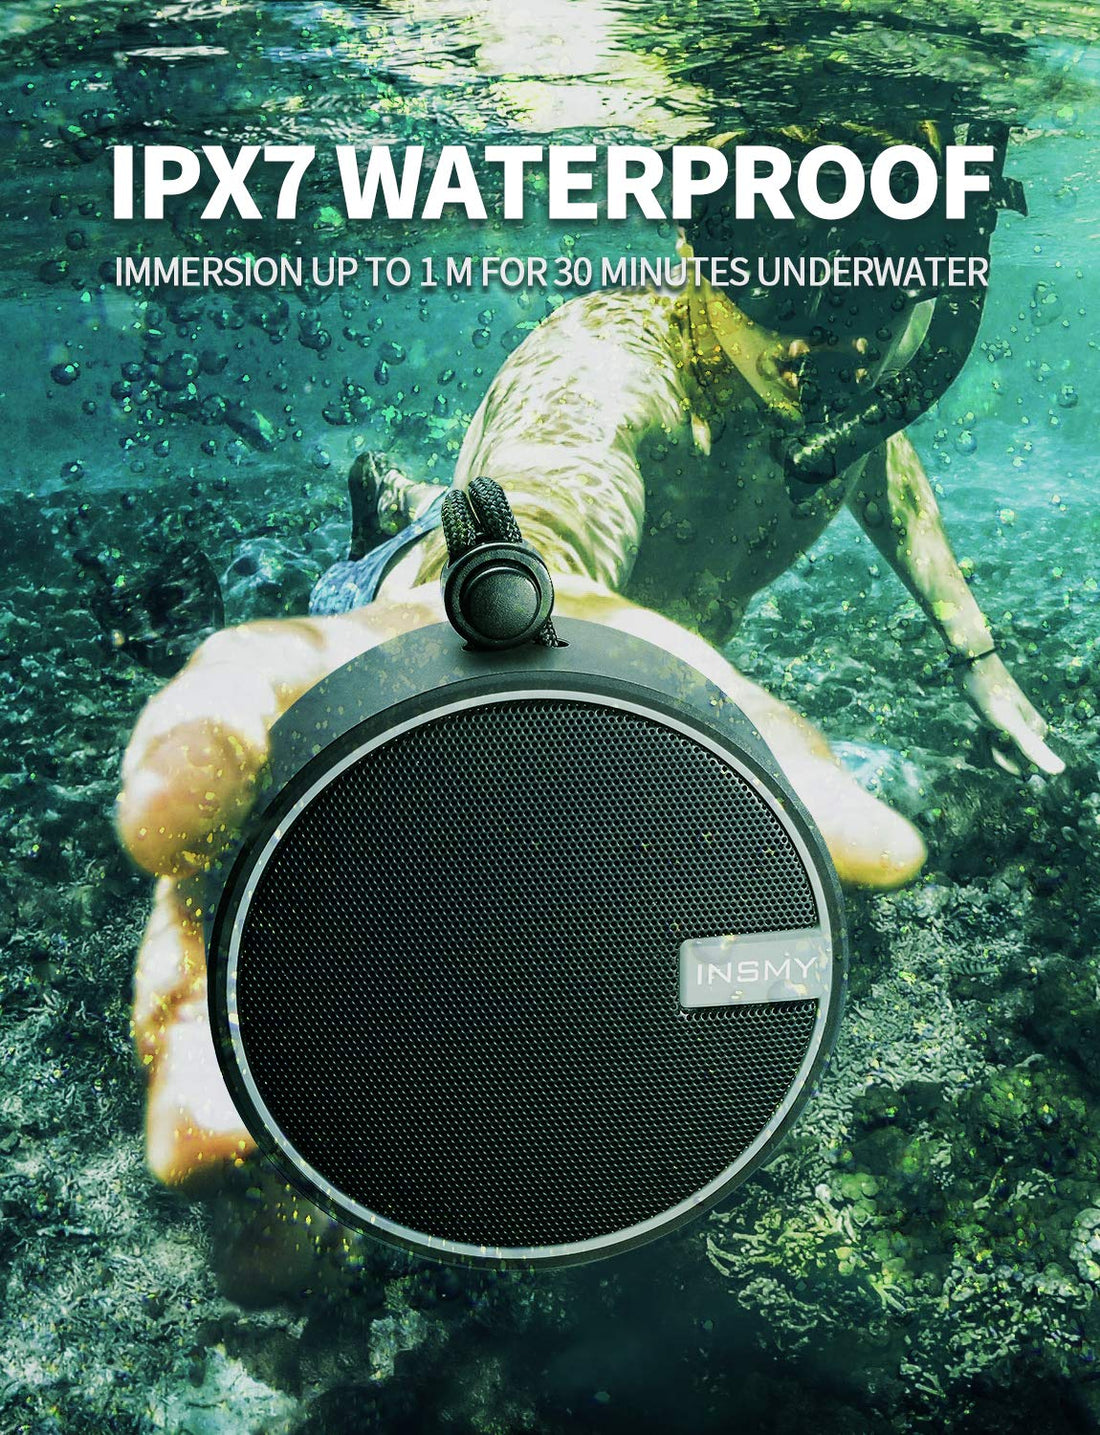 INSMY Portable Shower Speaker, IPX7 Waterproof Wireless Ourdoor Speaker with HD Sound, Support TF Card, Suction Cup for Home, Pool, Beach, Boating, Hiking